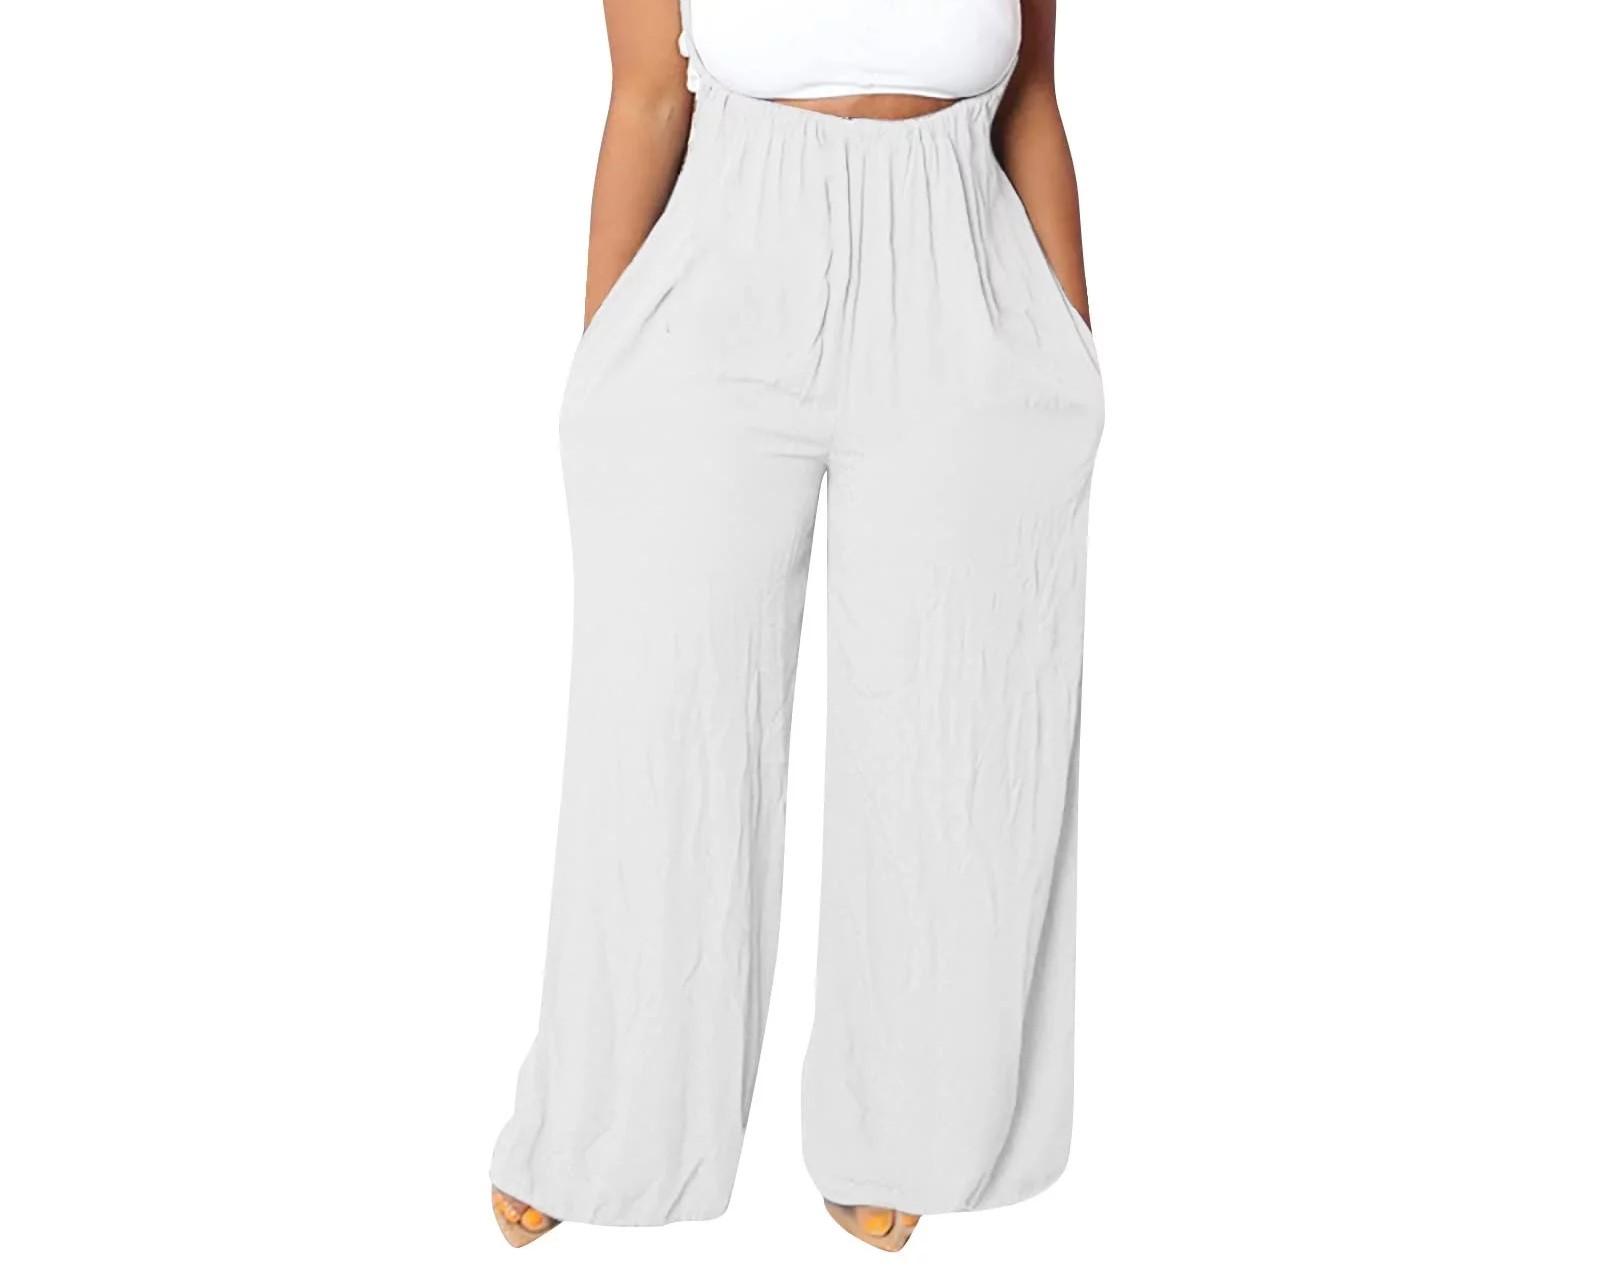 Women’s Opinions On The Rising Trend Of Wide Leg Pants And Feminine Jumpsuits